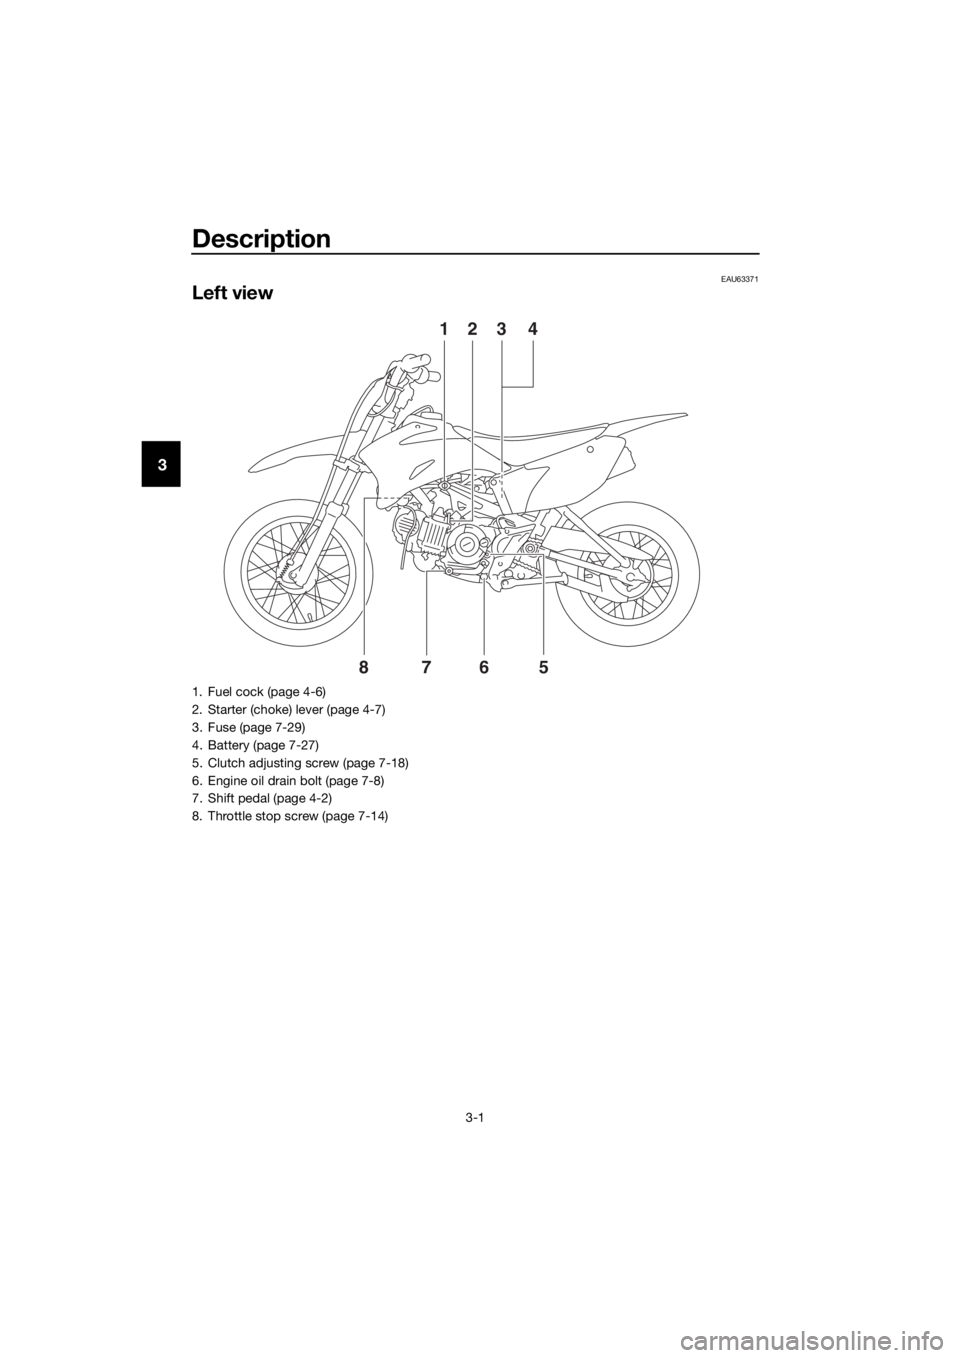 YAMAHA TT-R110E 2020  Owners Manual Description
3-1
3
EAU63371
Left view
678
123 45
1. Fuel cock (page 4-6)
2. Starter (choke) lever (page 4-7)
3. Fuse (page 7-29)
4. Battery (page 7-27)
5. Clutch adjusting screw (page 7-18)
6. Engine o